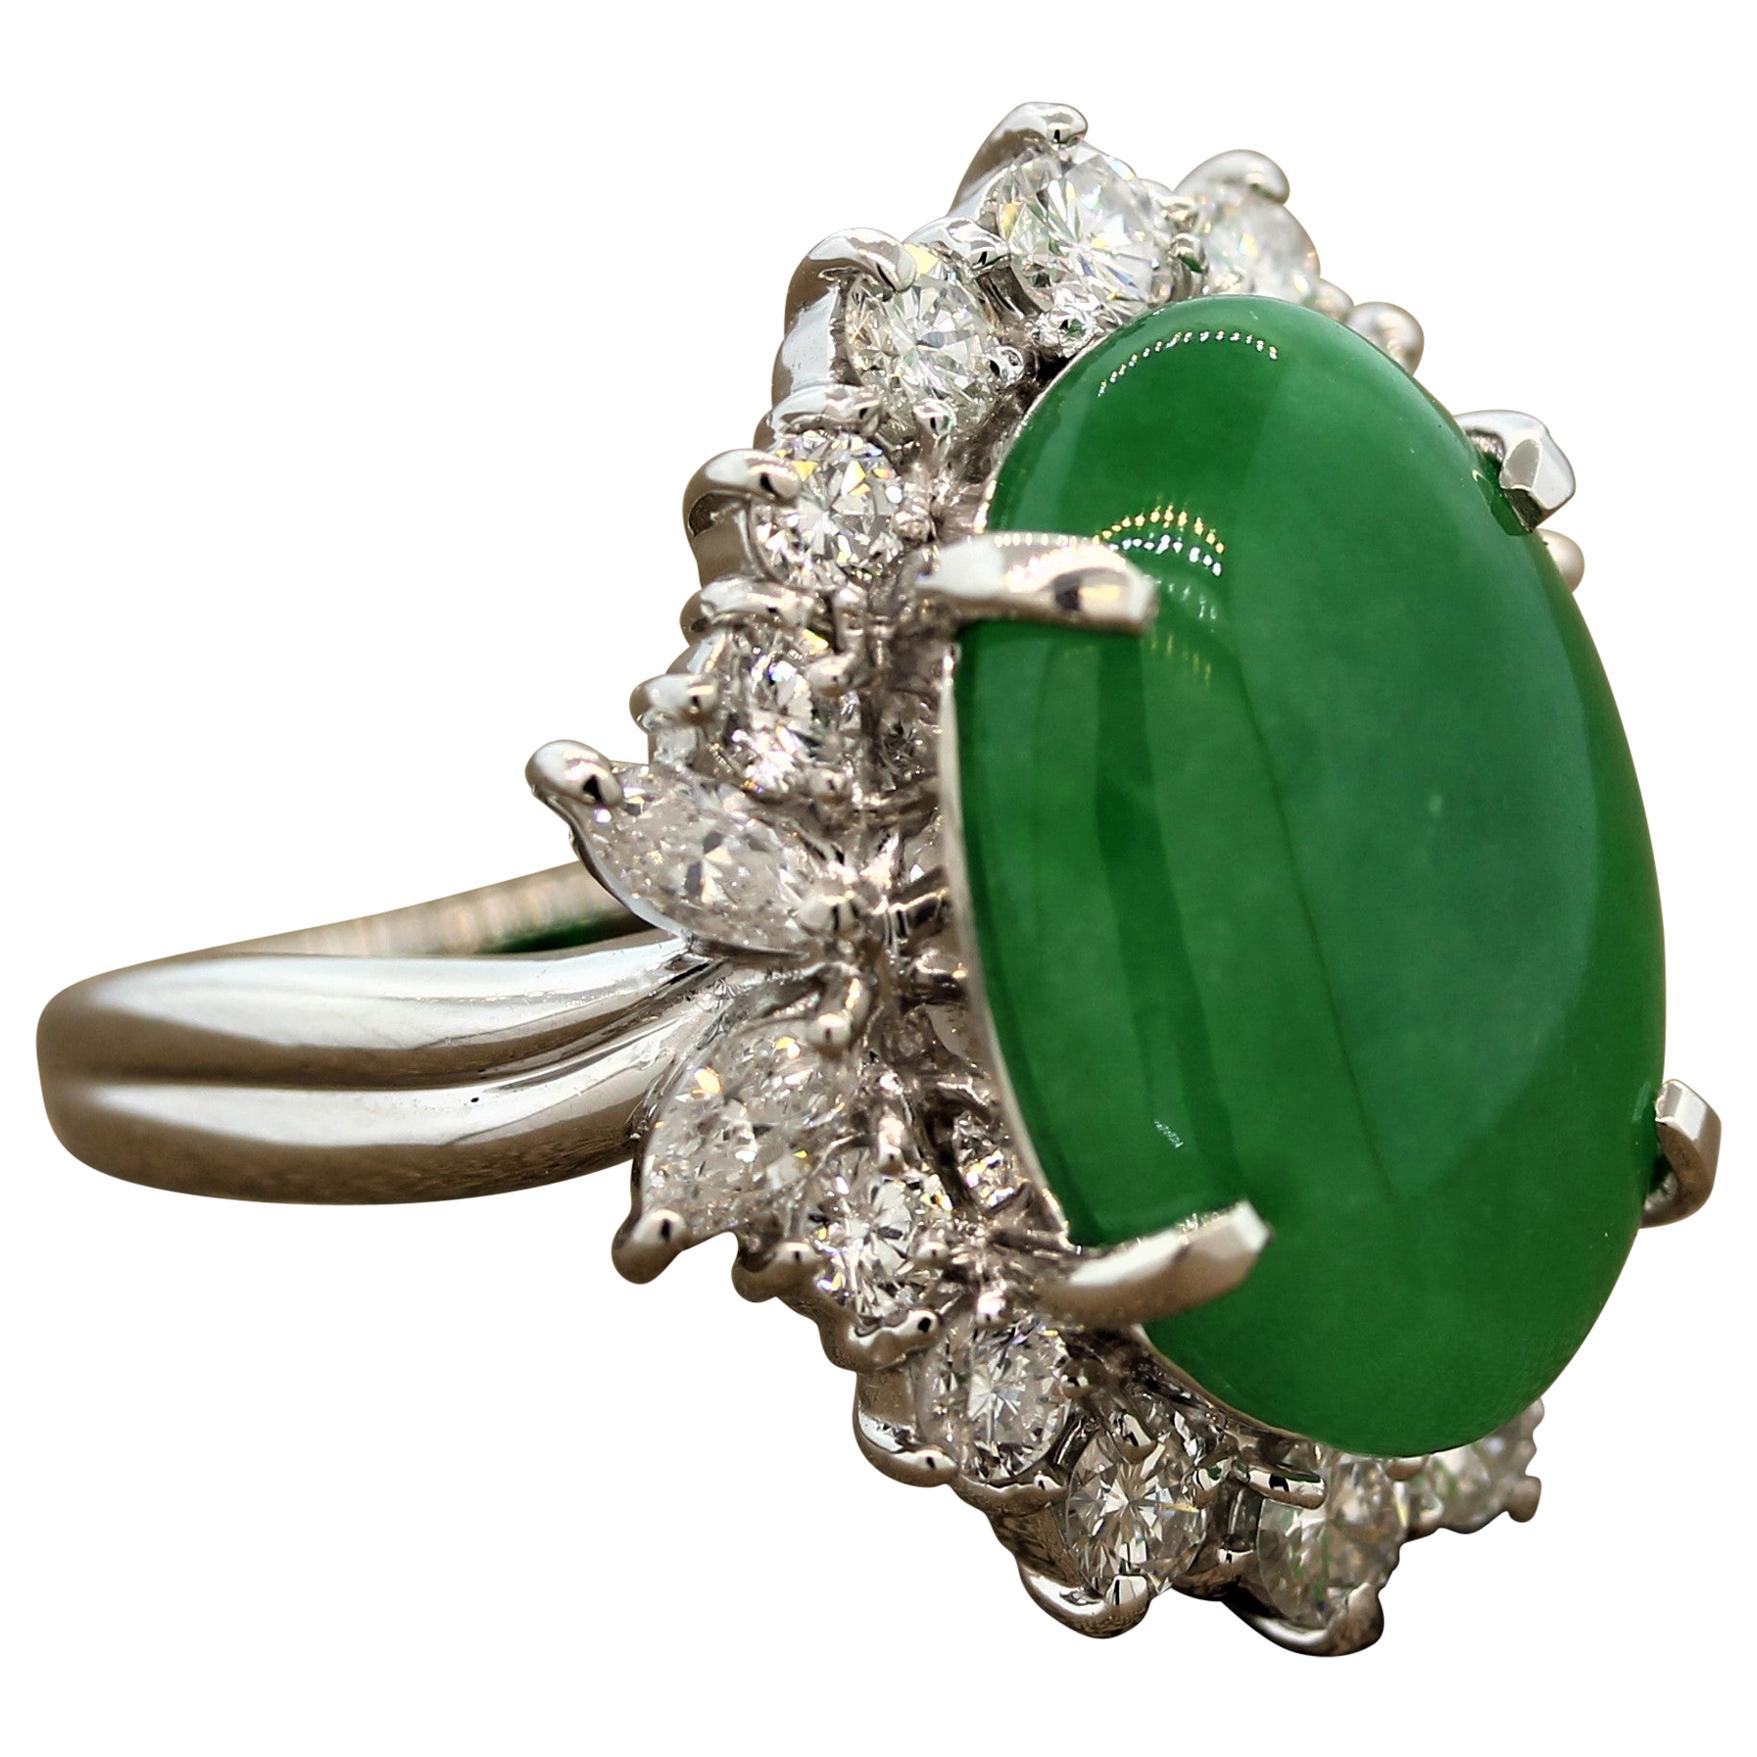 This alluring ring features an oval cabochon jadeite jade surrounded by a halo of 1.62 carats of diamonds in a platinum setting. The colorless round cut and marquise cut diamonds gleam with exuberance making this ring as exceptional as it is